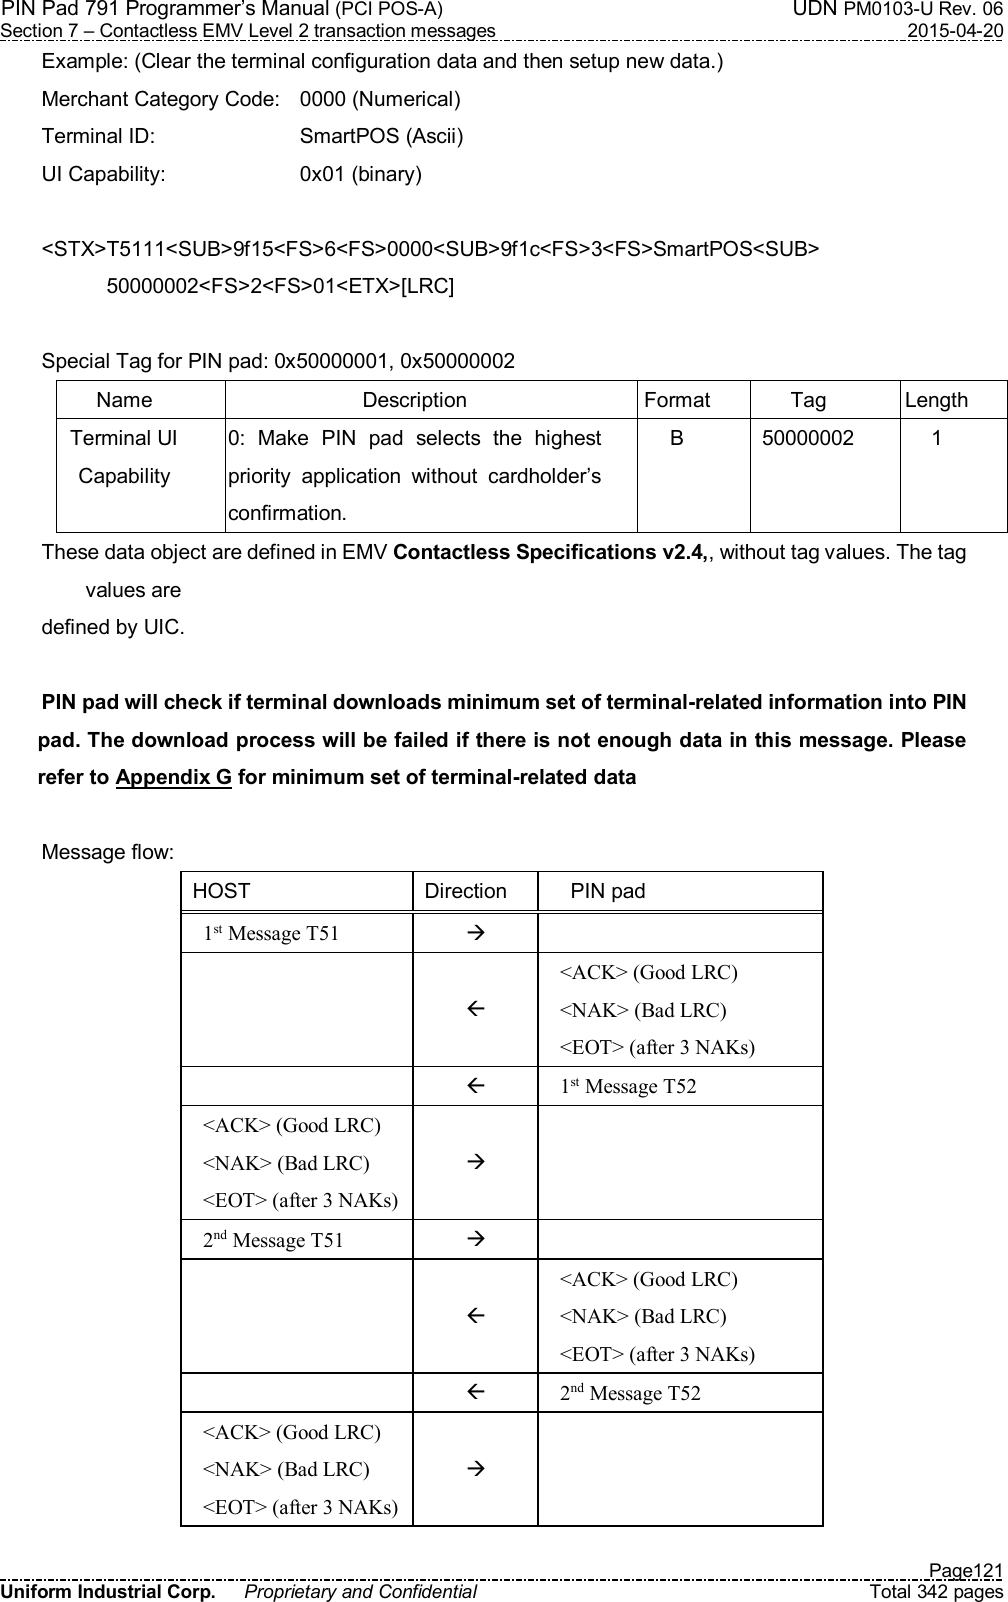 PIN Pad 791 Programmer’s Manual (PCI POS-A)  UDN PM0103-U Rev. 06 Section 7 – Contactless EMV Level 2 transaction messages  2015-04-20   Page121 Uniform Industrial Corp.  Proprietary and Confidential  Total 342 pages Example: (Clear the terminal configuration data and then setup new data.) Merchant Category Code:  0000 (Numerical) Terminal ID:      SmartPOS (Ascii) UI Capability:      0x01 (binary)  &lt;STX&gt;T5111&lt;SUB&gt;9f15&lt;FS&gt;6&lt;FS&gt;0000&lt;SUB&gt;9f1c&lt;FS&gt;3&lt;FS&gt;SmartPOS&lt;SUB&gt; 50000002&lt;FS&gt;2&lt;FS&gt;01&lt;ETX&gt;[LRC]  Special Tag for PIN pad: 0x50000001, 0x50000002 Name  Description  Format  Tag  Length Terminal UI Capability 0:  Make  PIN  pad  selects  the  highest priority  application  without  cardholder’s confirmation. B  50000002  1 These data object are defined in EMV Contactless Specifications v2.4,, without tag values. The tag values are   defined by UIC.  PIN pad will check if terminal downloads minimum set of terminal-related information into PIN pad. The download process will be failed if there is not enough data in this message. Please refer to Appendix G for minimum set of terminal-related data  Message flow: HOST  Direction      PIN pad 1st Message T51      &lt;ACK&gt; (Good LRC) &lt;NAK&gt; (Bad LRC) &lt;EOT&gt; (after 3 NAKs)   1st Message T52 &lt;ACK&gt; (Good LRC) &lt;NAK&gt; (Bad LRC) &lt;EOT&gt; (after 3 NAKs)   2nd Message T51      &lt;ACK&gt; (Good LRC) &lt;NAK&gt; (Bad LRC) &lt;EOT&gt; (after 3 NAKs)   2nd Message T52 &lt;ACK&gt; (Good LRC) &lt;NAK&gt; (Bad LRC) &lt;EOT&gt; (after 3 NAKs)   